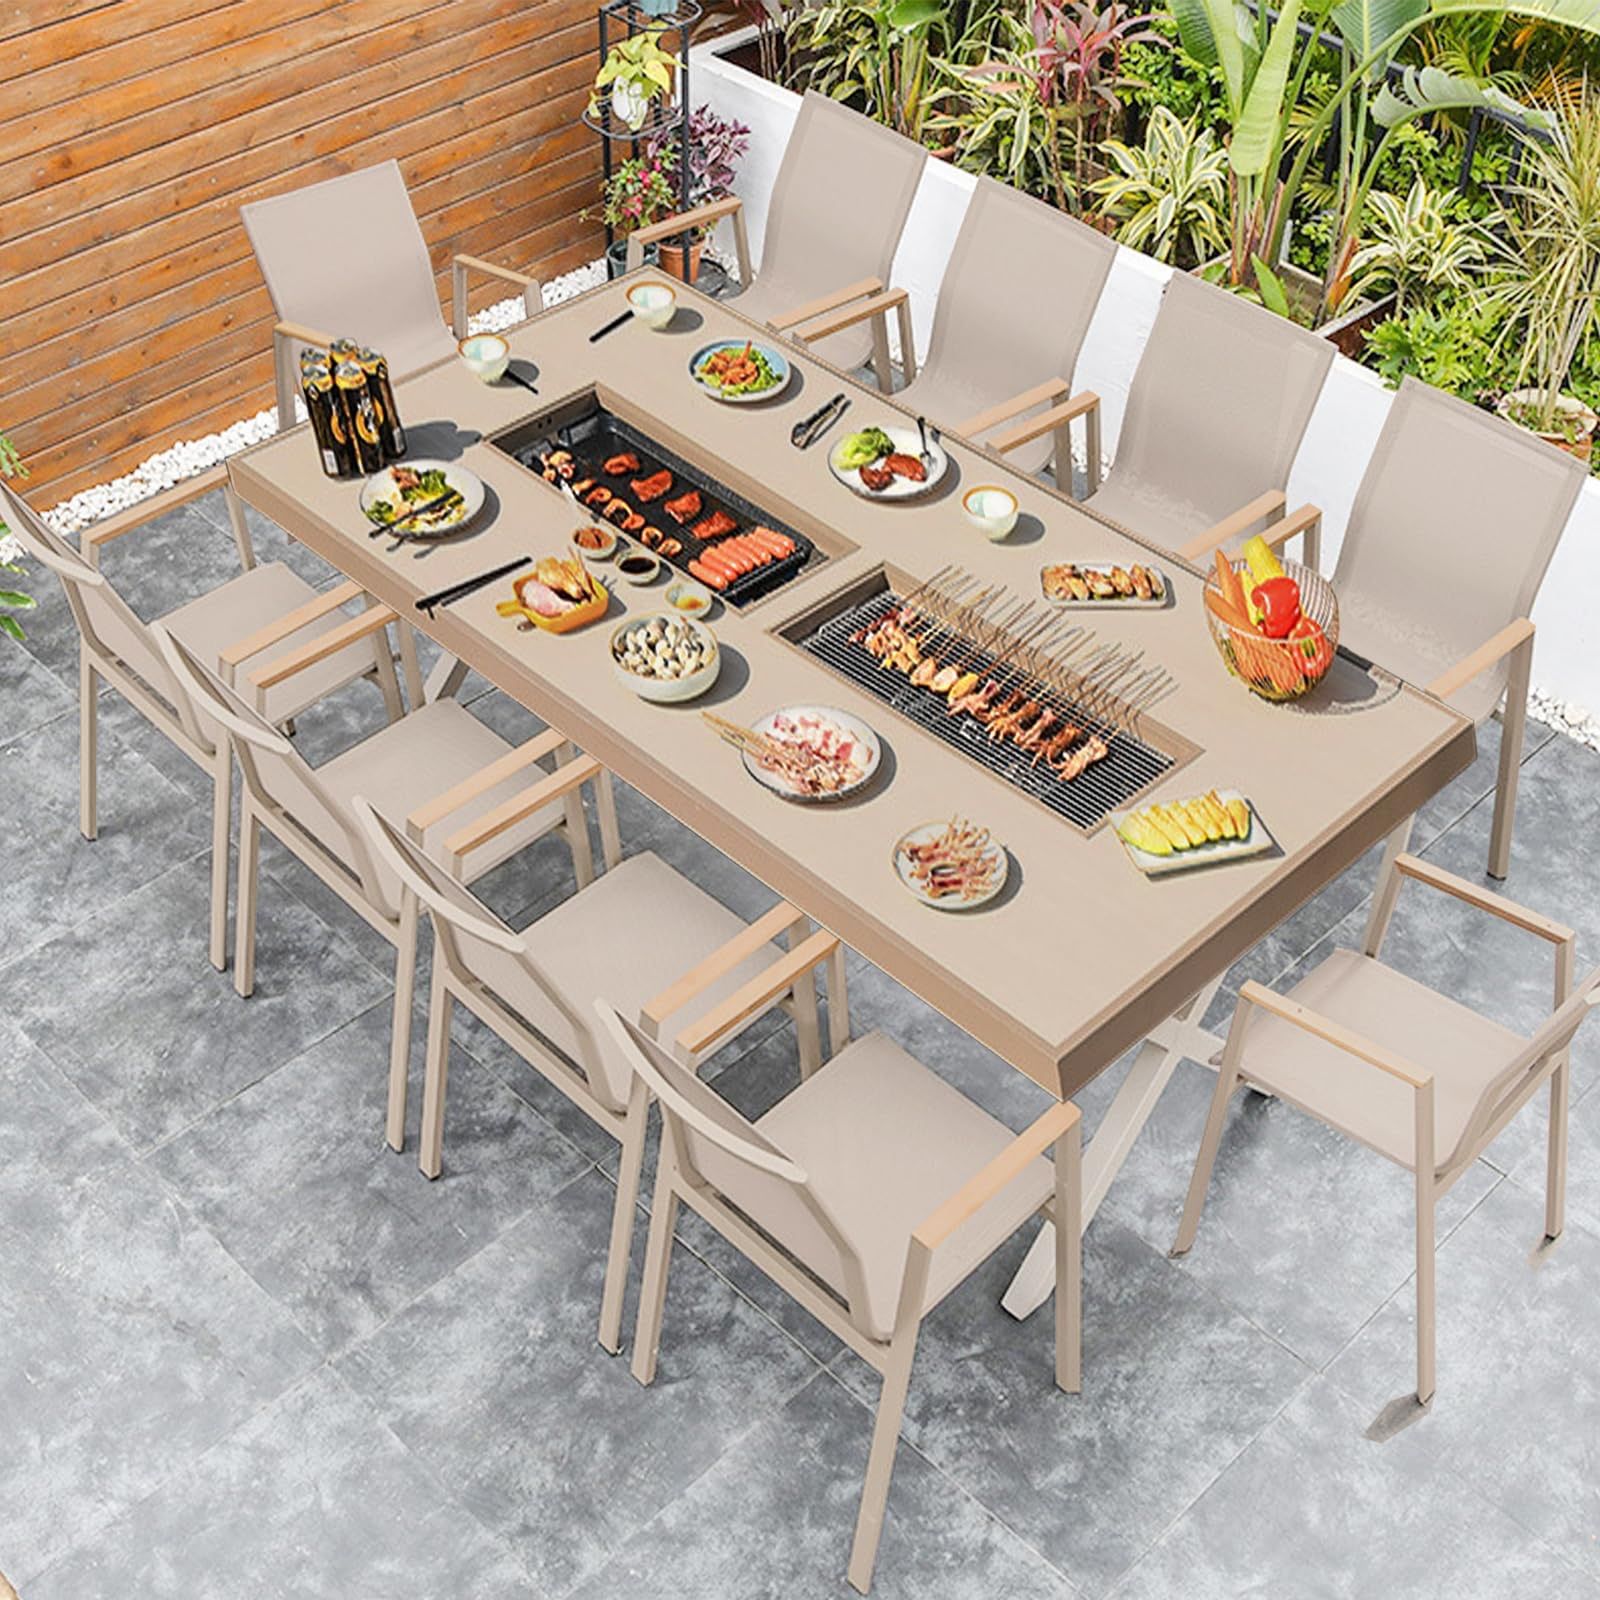 Deluxe Aluminum Outdoor BBQ Table and Chair Ensemble – Versatile 10-Seater Patio Dining and Grilling Station